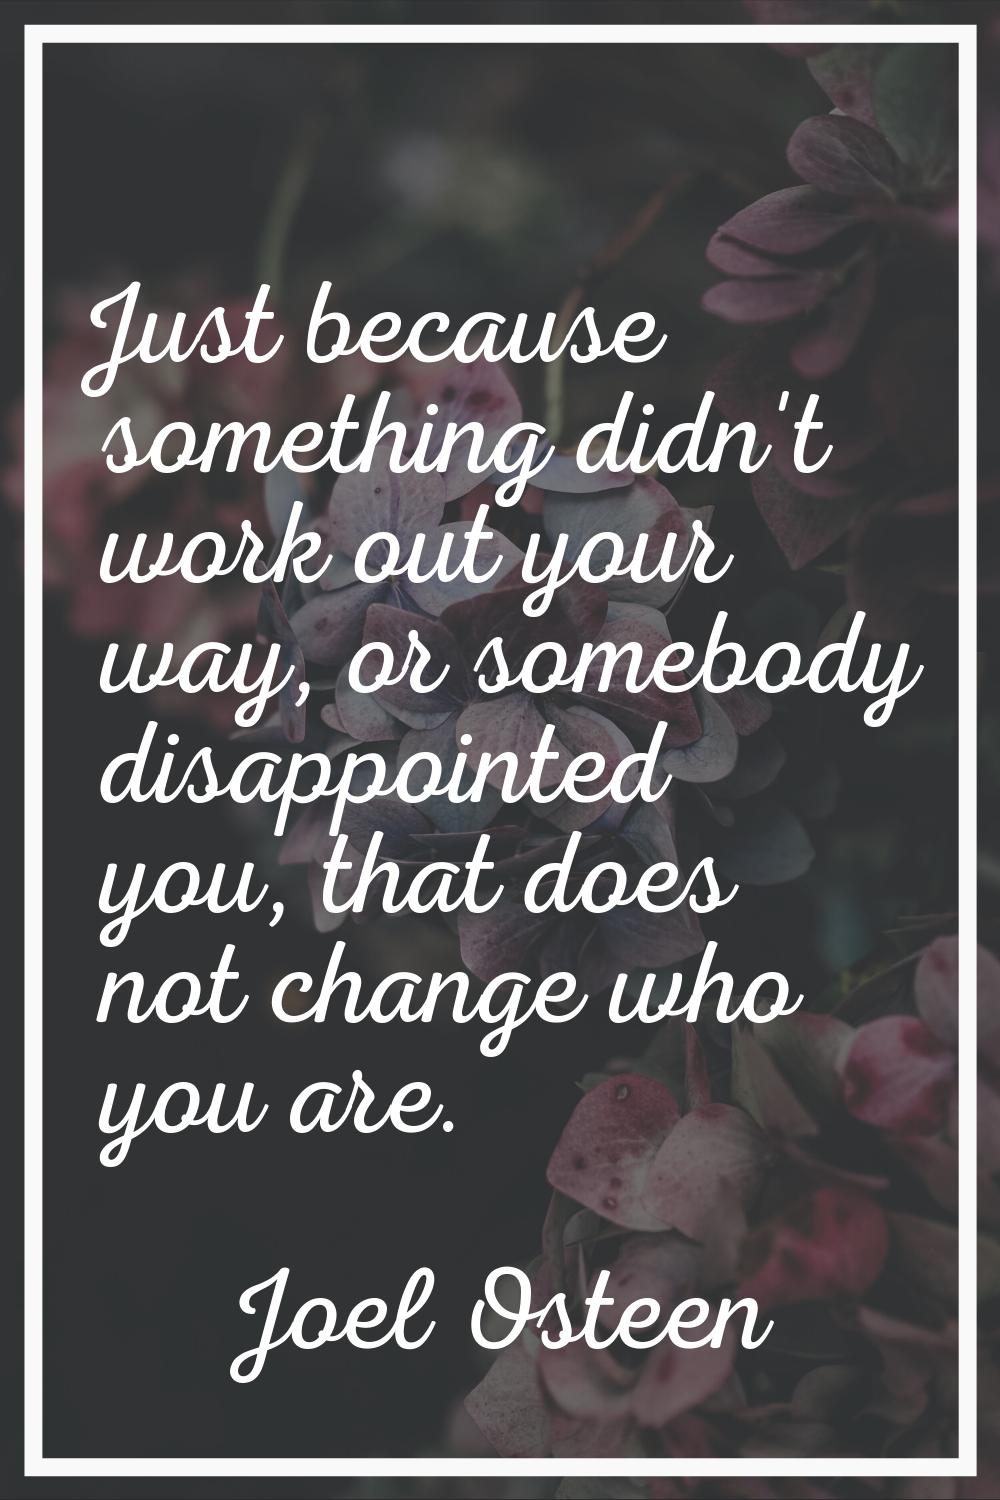 Just because something didn't work out your way, or somebody disappointed you, that does not change